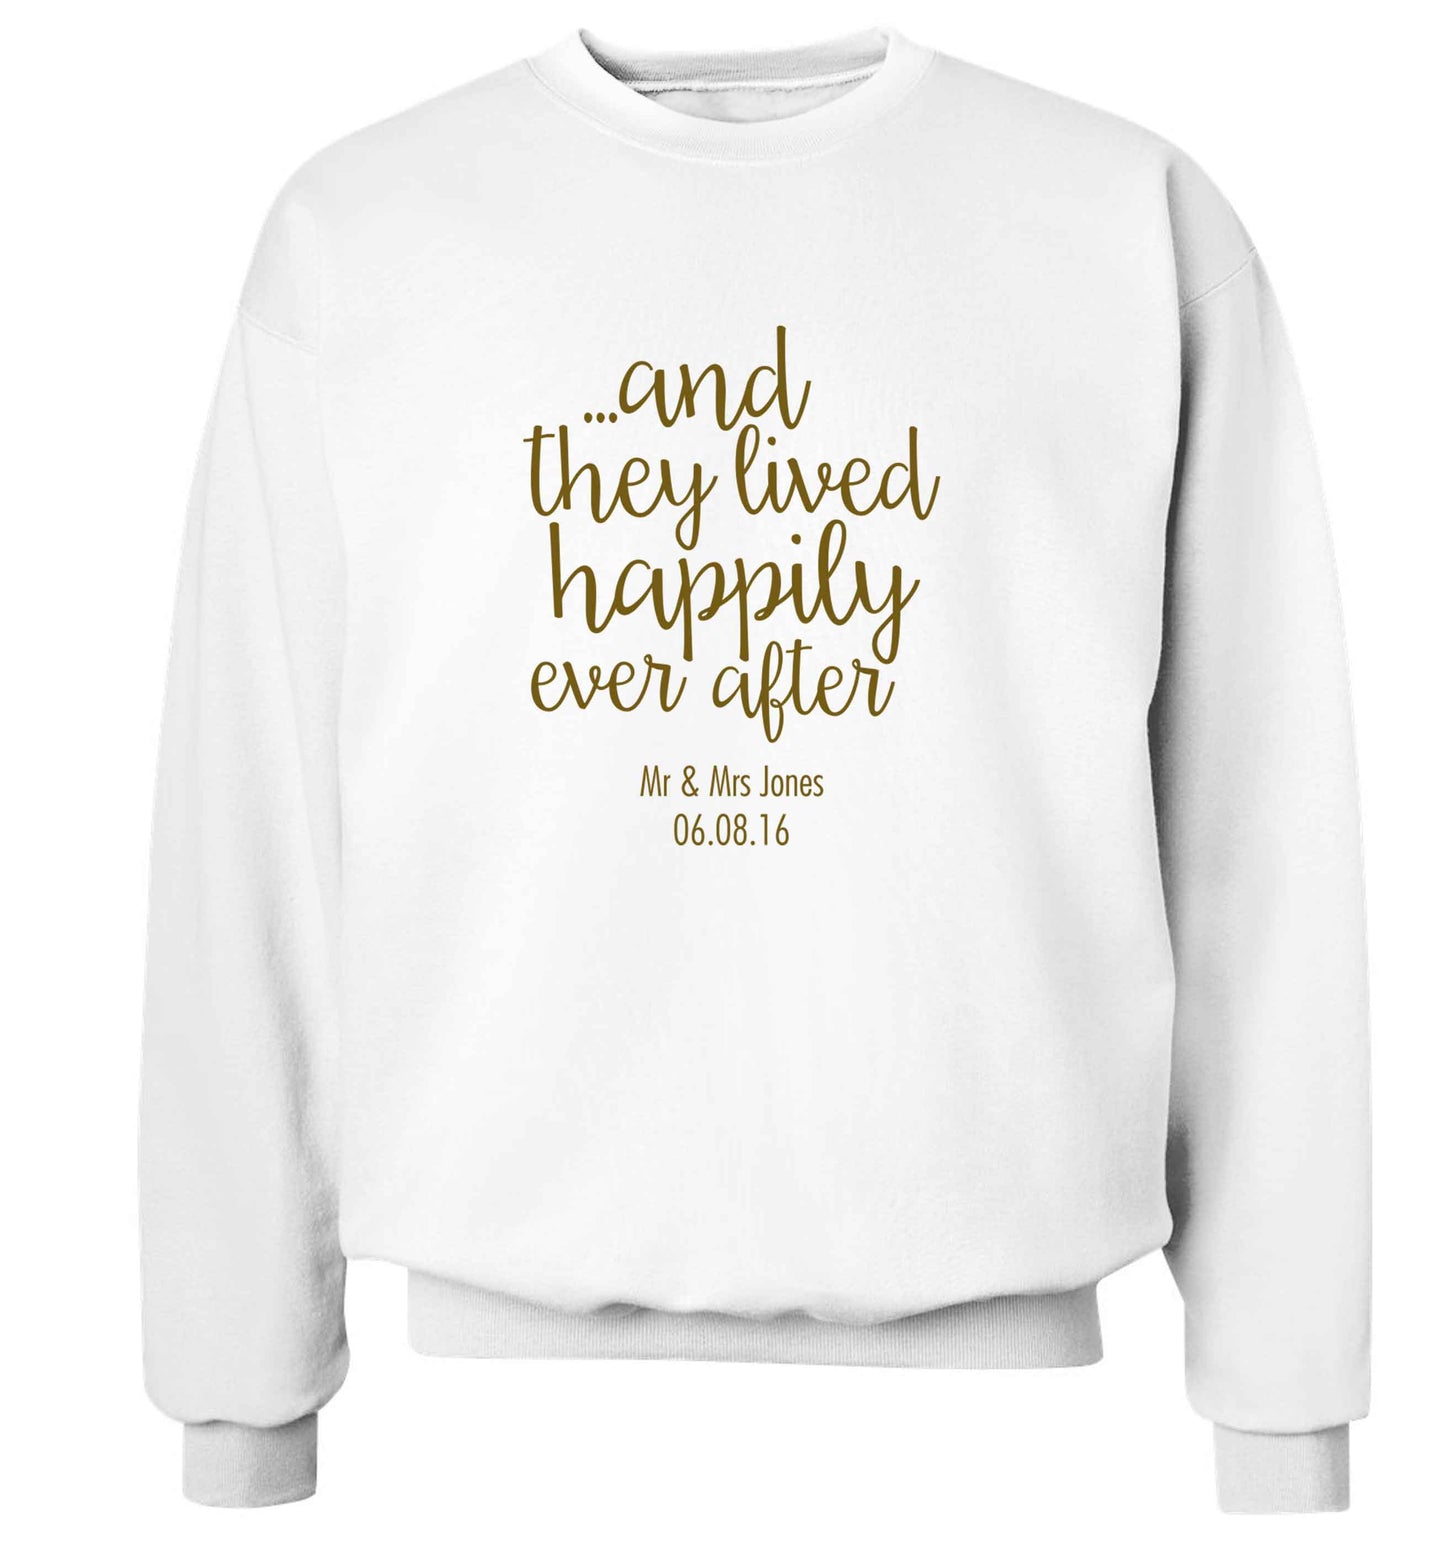 ...and they lived happily ever after - personalised date and names adult's unisex white sweater 2XL